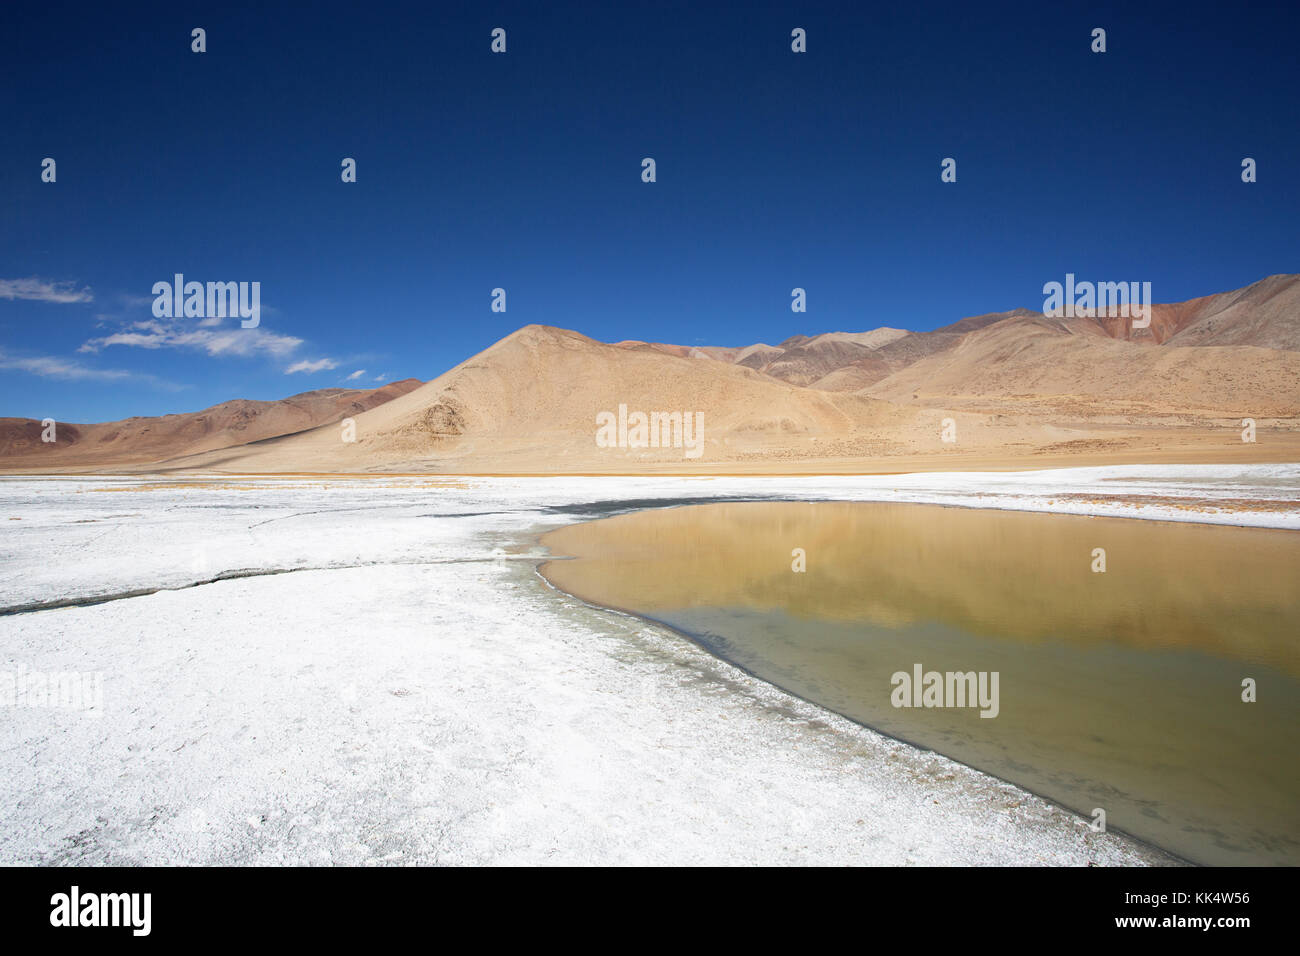 Yellow and orange colors in barren landscape and layers of salt on a clear autumn day at a fluctuating salt lake Tso Kar, Ladakh, India Stock Photo